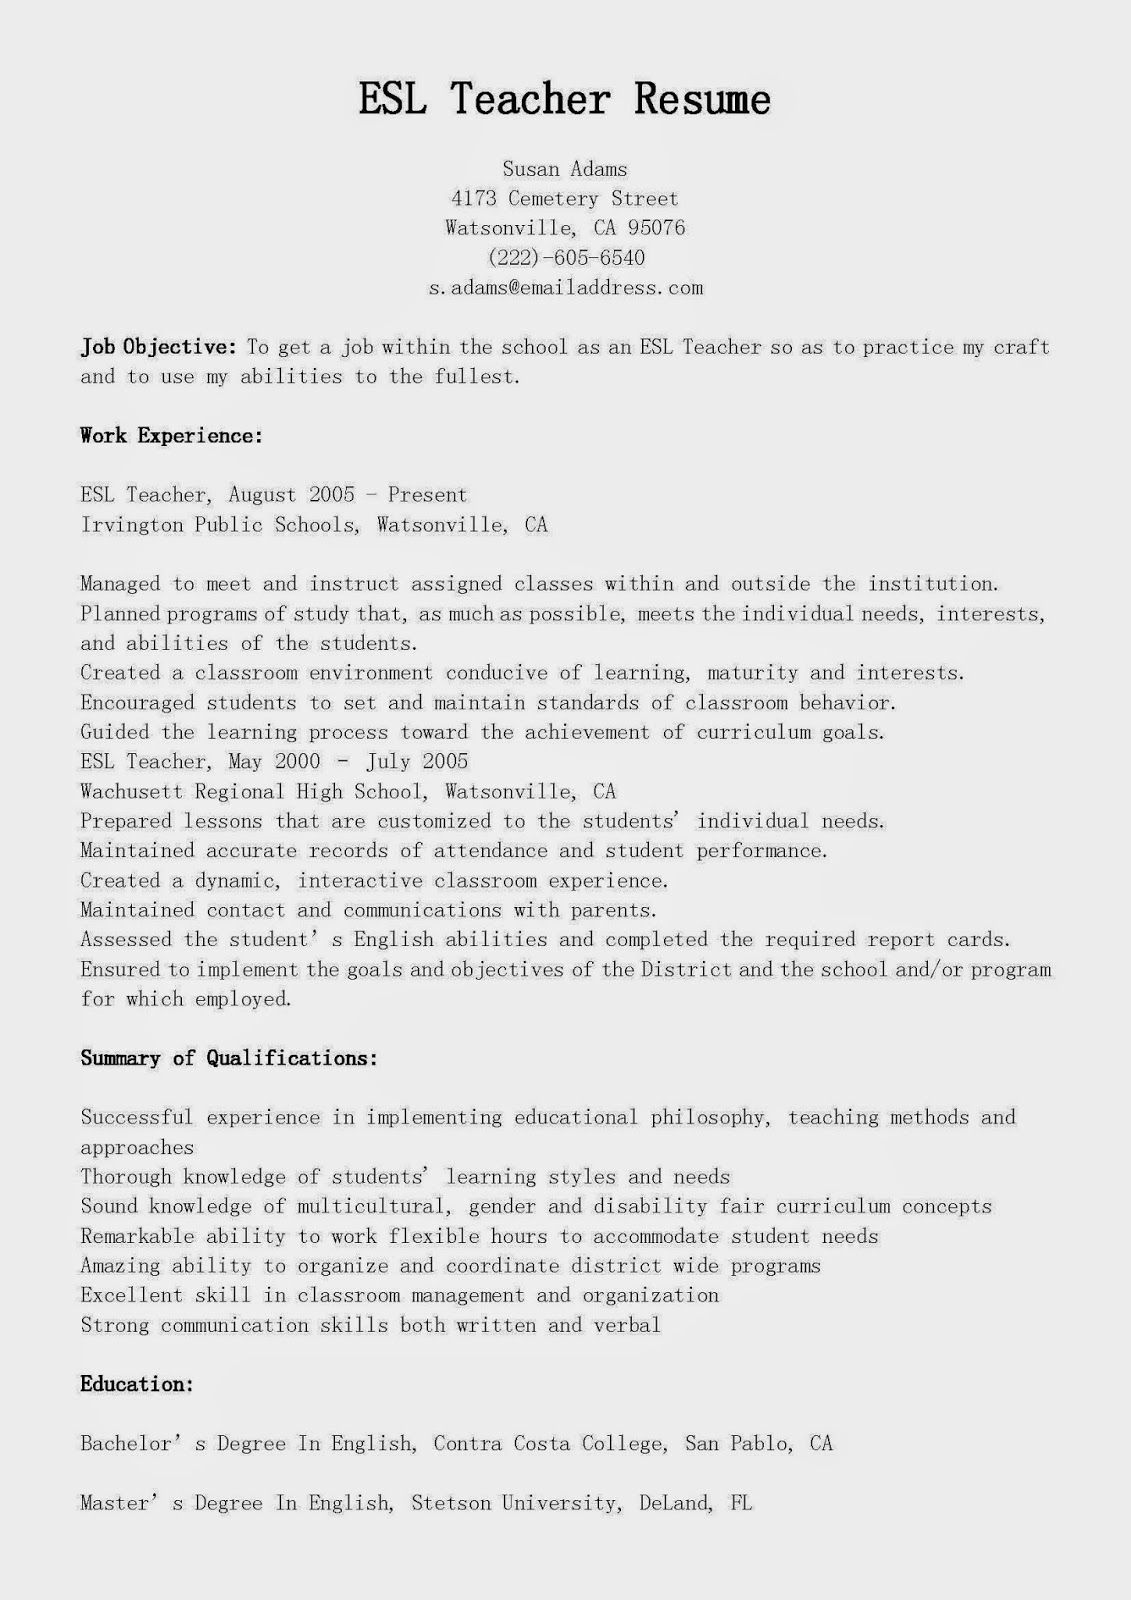 Writing resume for chef position